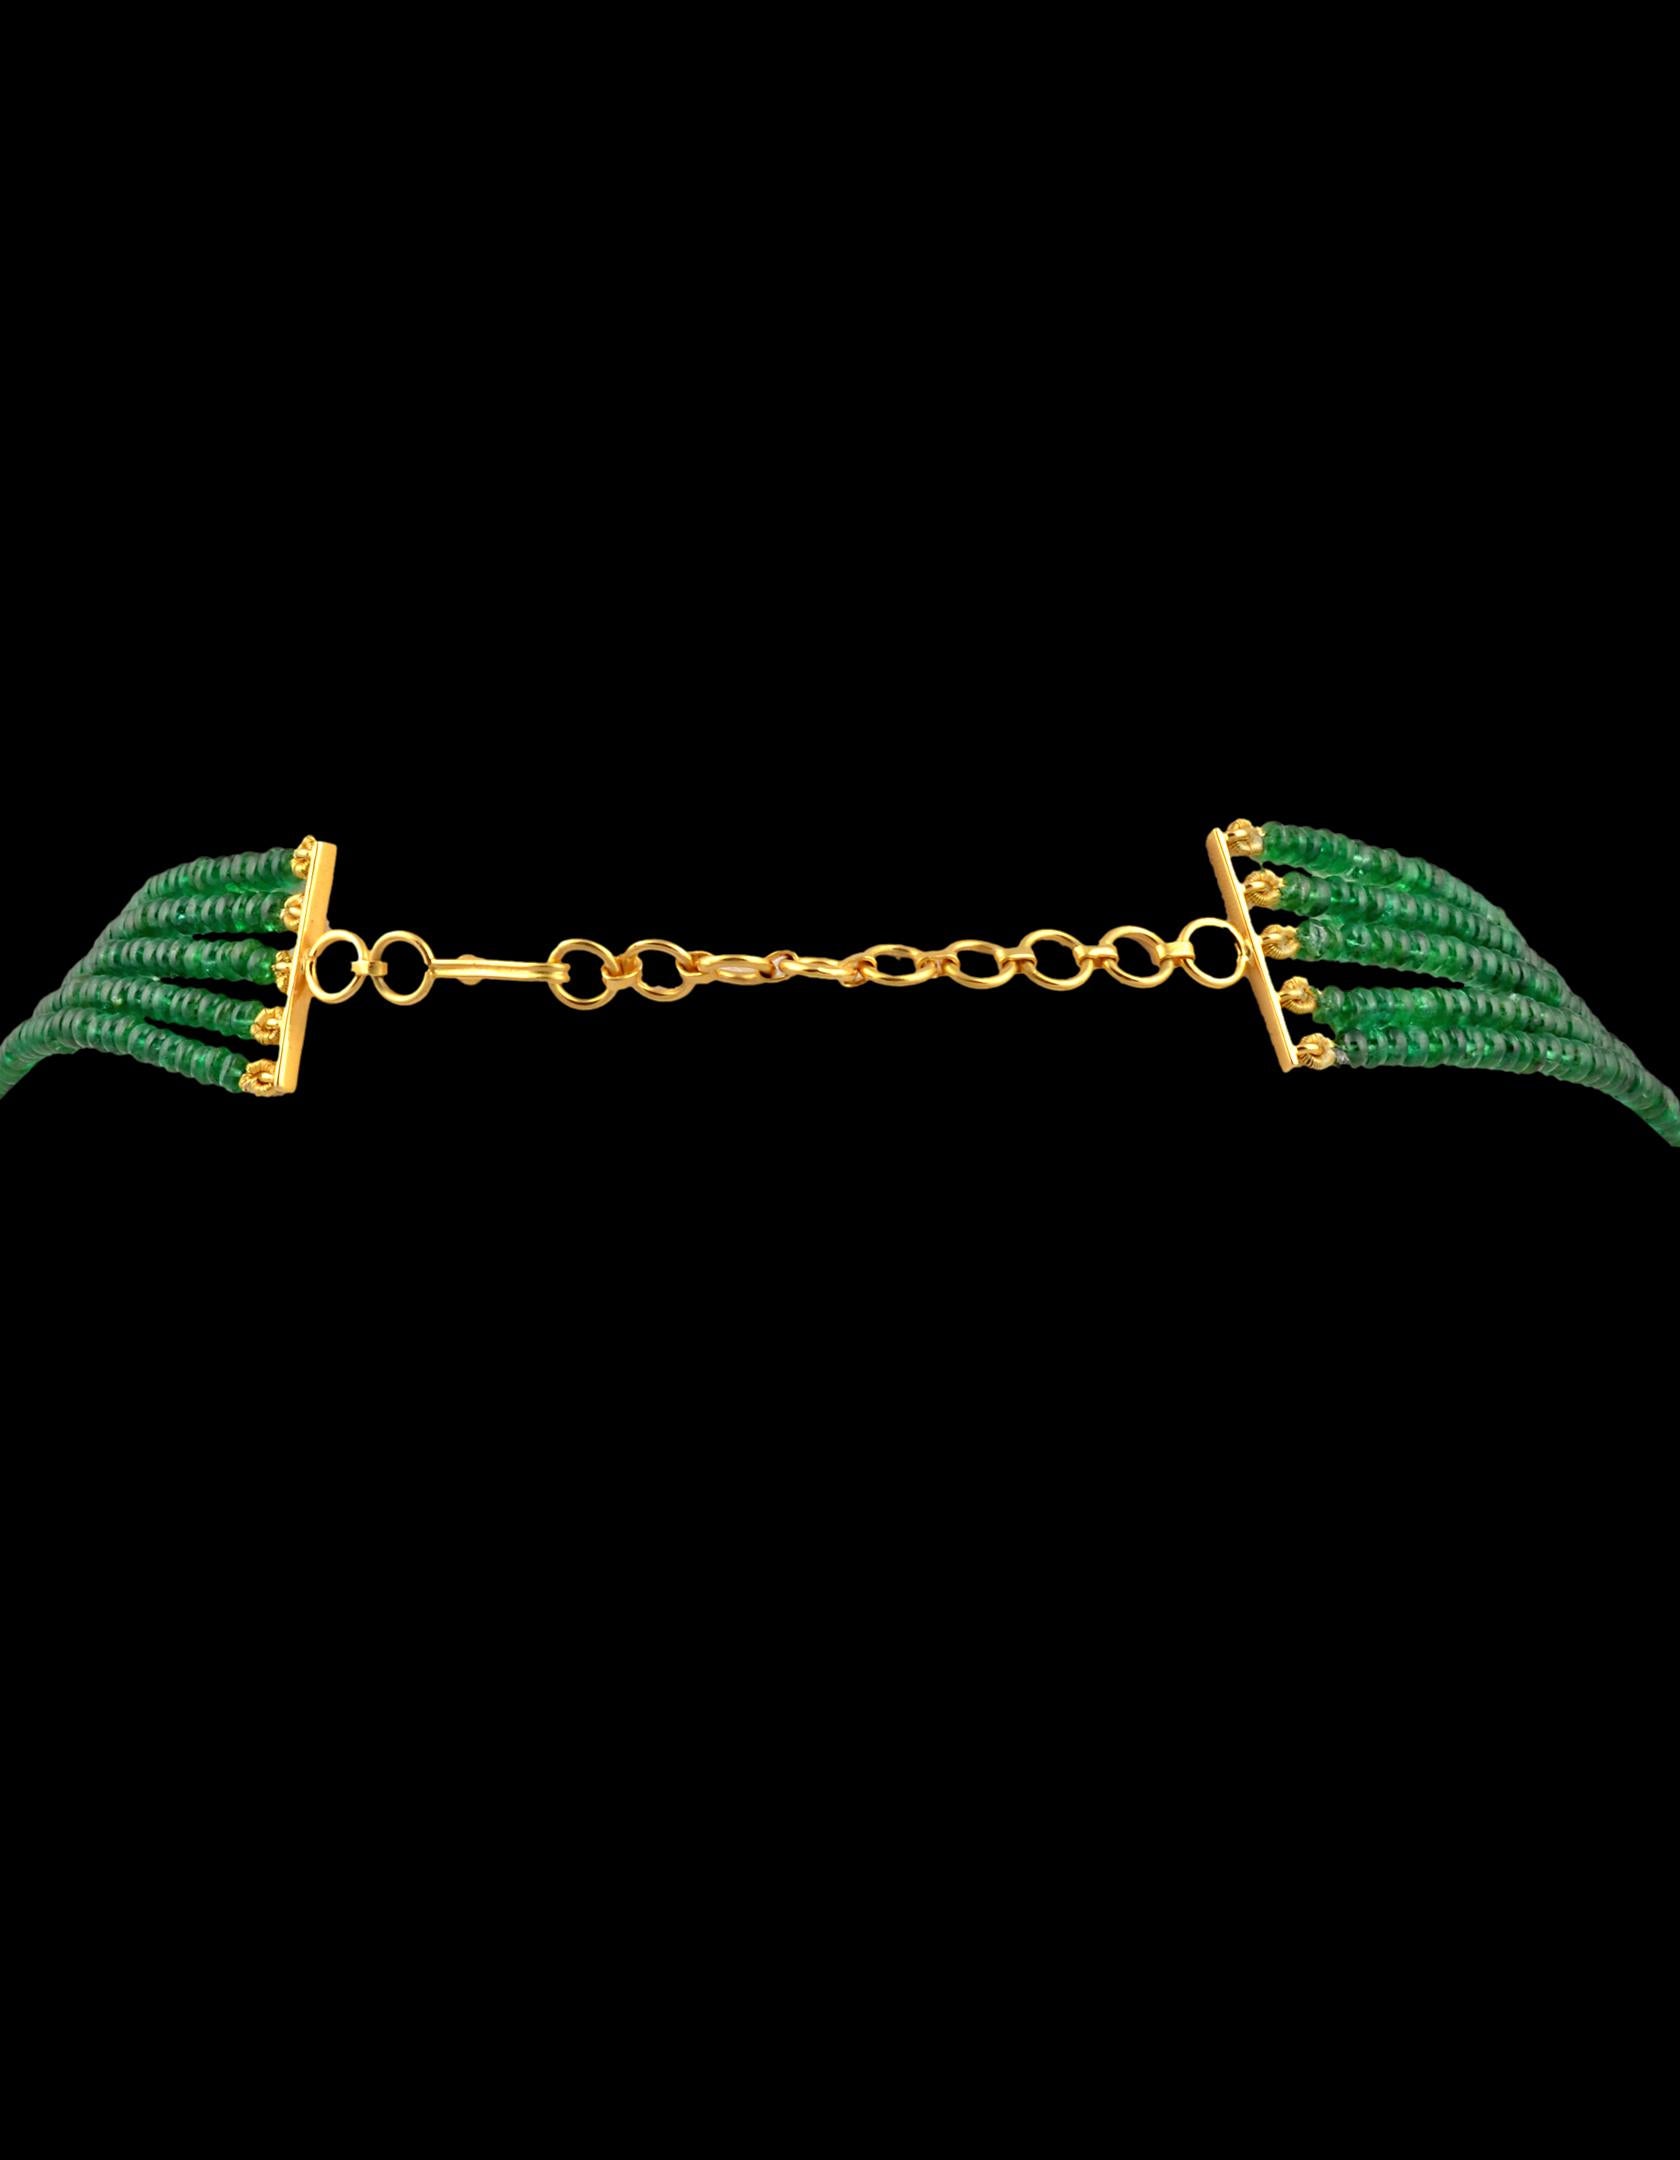 300ct Fine Emerald Beads 5 Line Necklace with 14 kt Yellow Gold Clasp Adjustable In New Condition For Sale In New York, NY